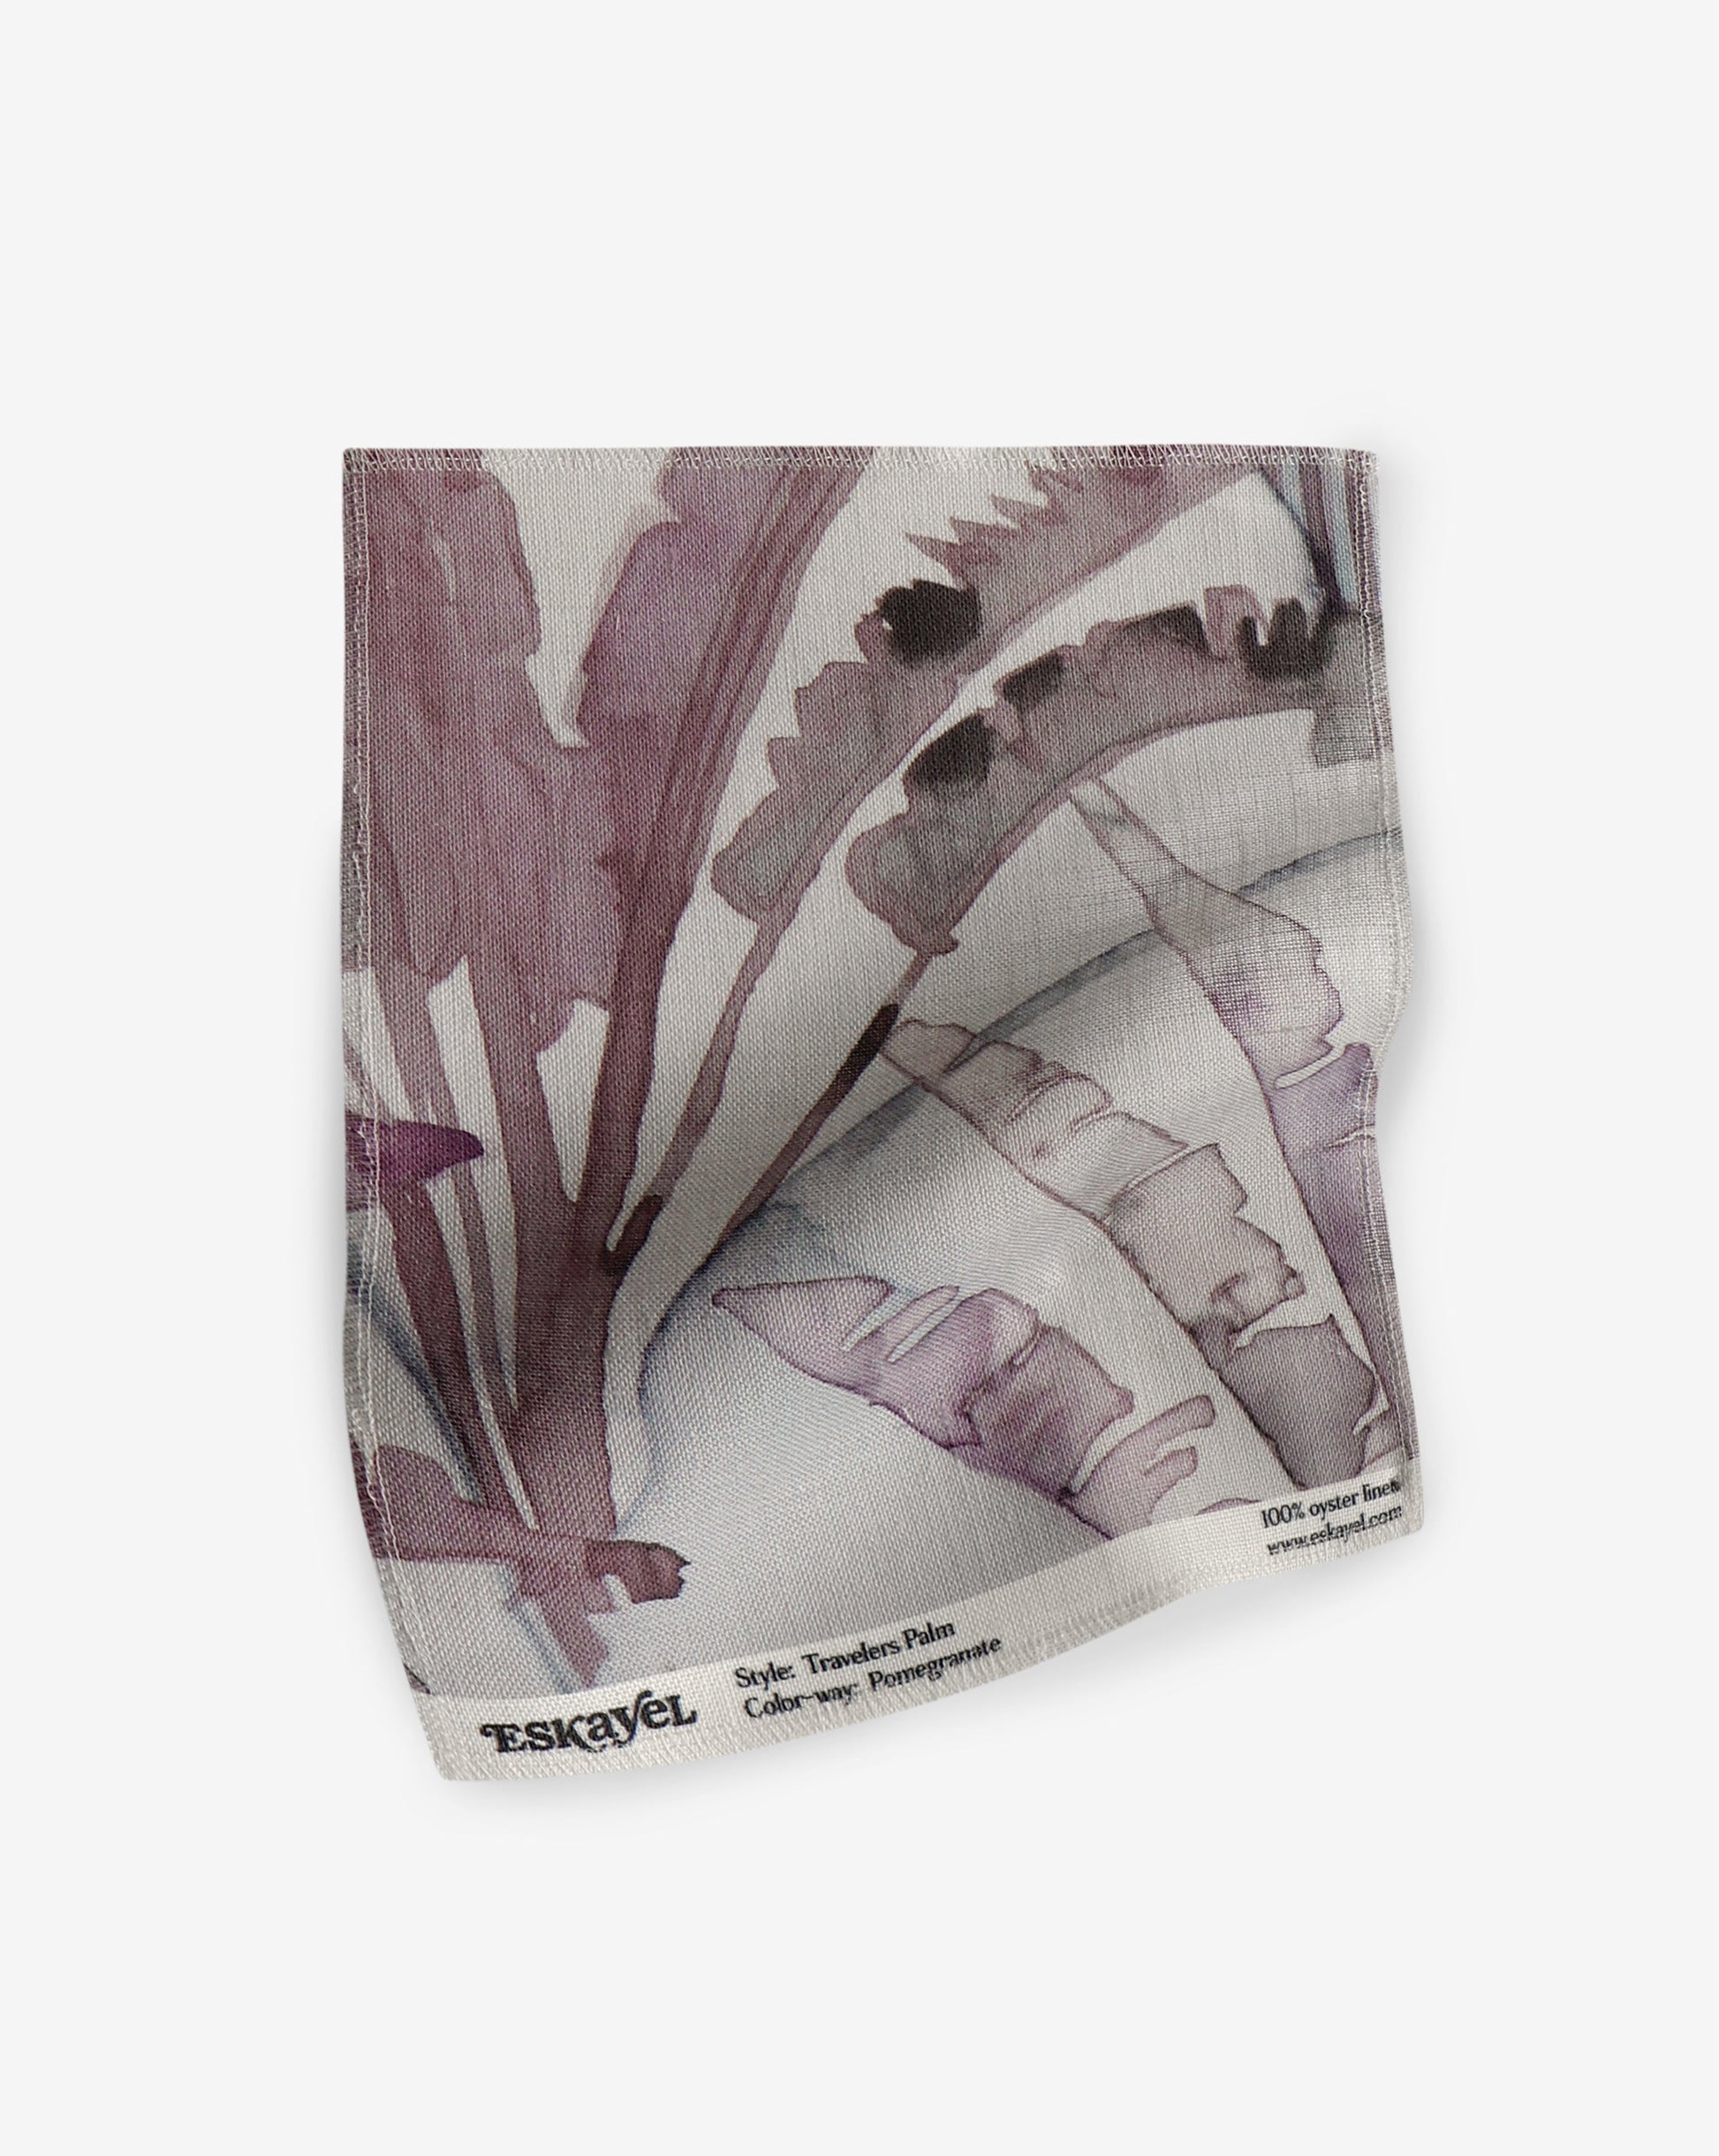 a Travelers Palm Fabric Sample Pomegranate with a purple and white pattern on it